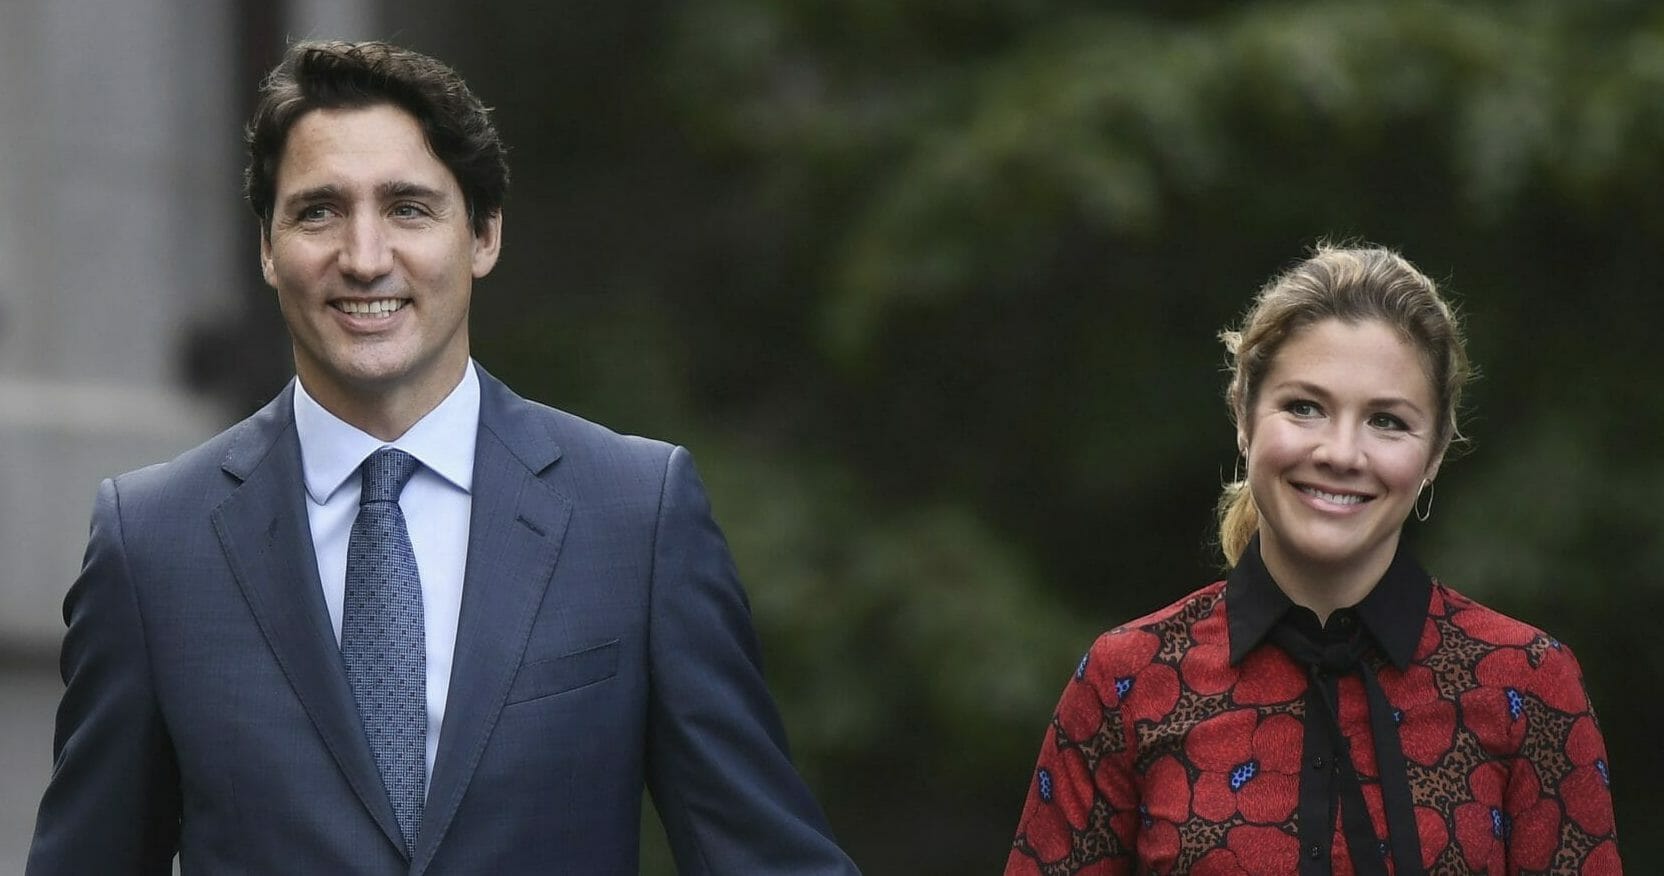 Canadian Prime Minister Justin Trudeau and his wife, Sophie Gregoire Trudeau, arrive at Rideau Hall in Ottawa, Ontario, on Sept. 11, 2019.